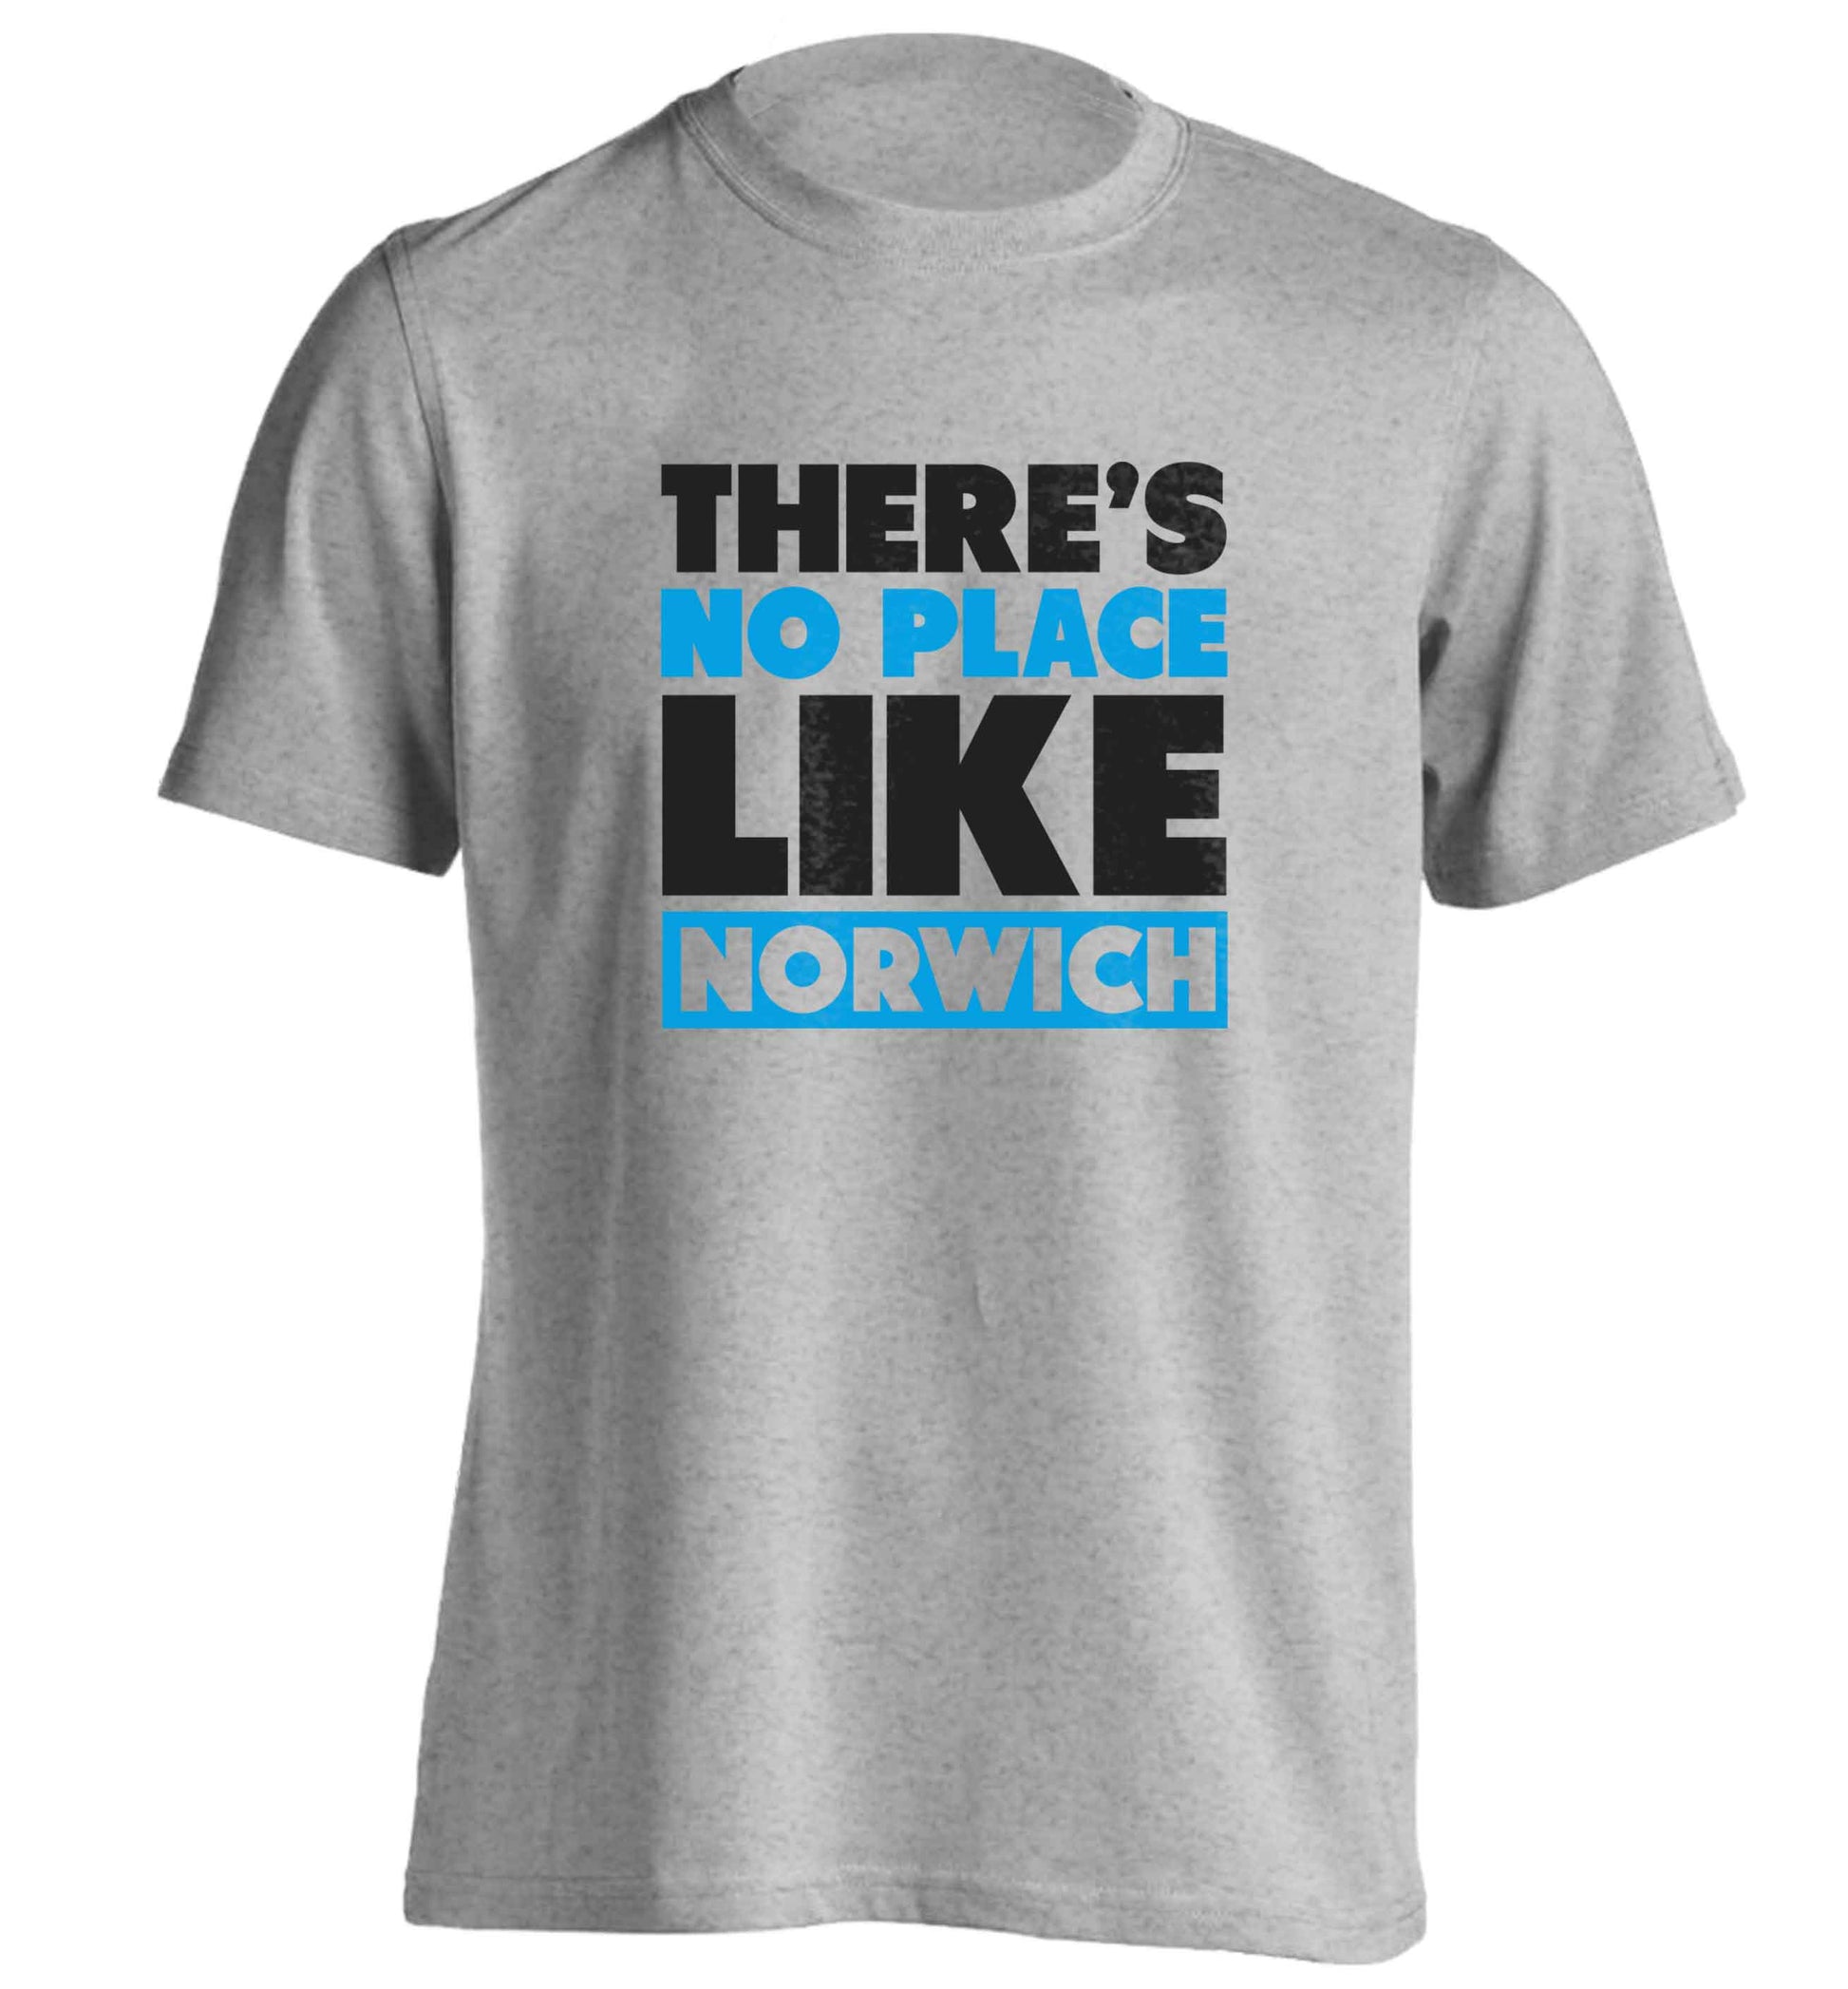 There's no place like Norwich adults unisex grey Tshirt 2XL